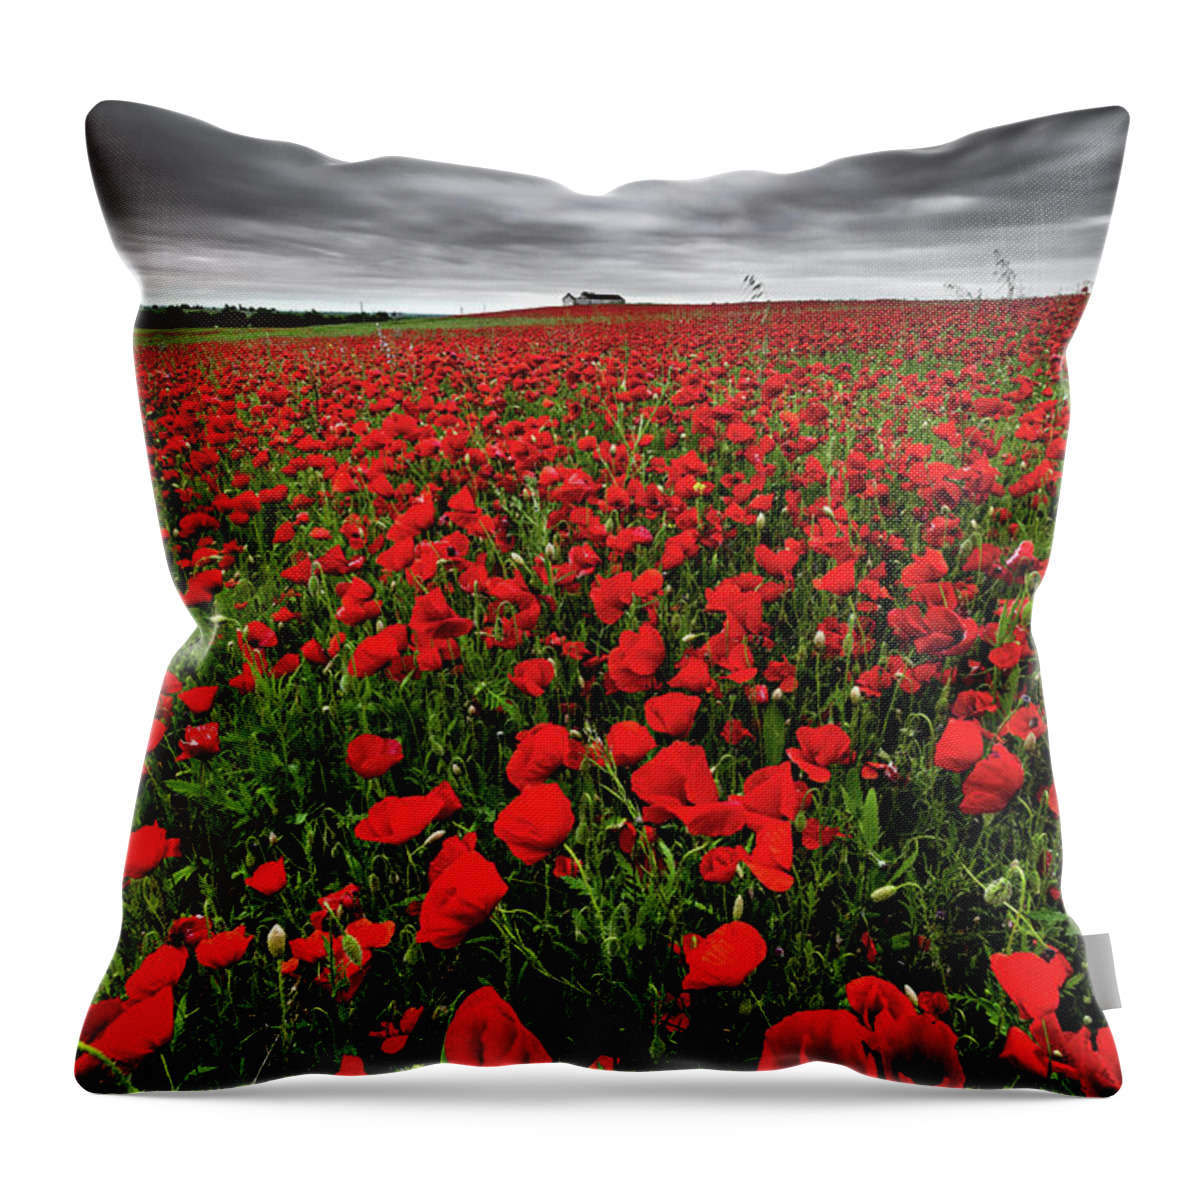 Poppy Throw Pillow featuring the photograph Wild Poppies by Jorge Maia